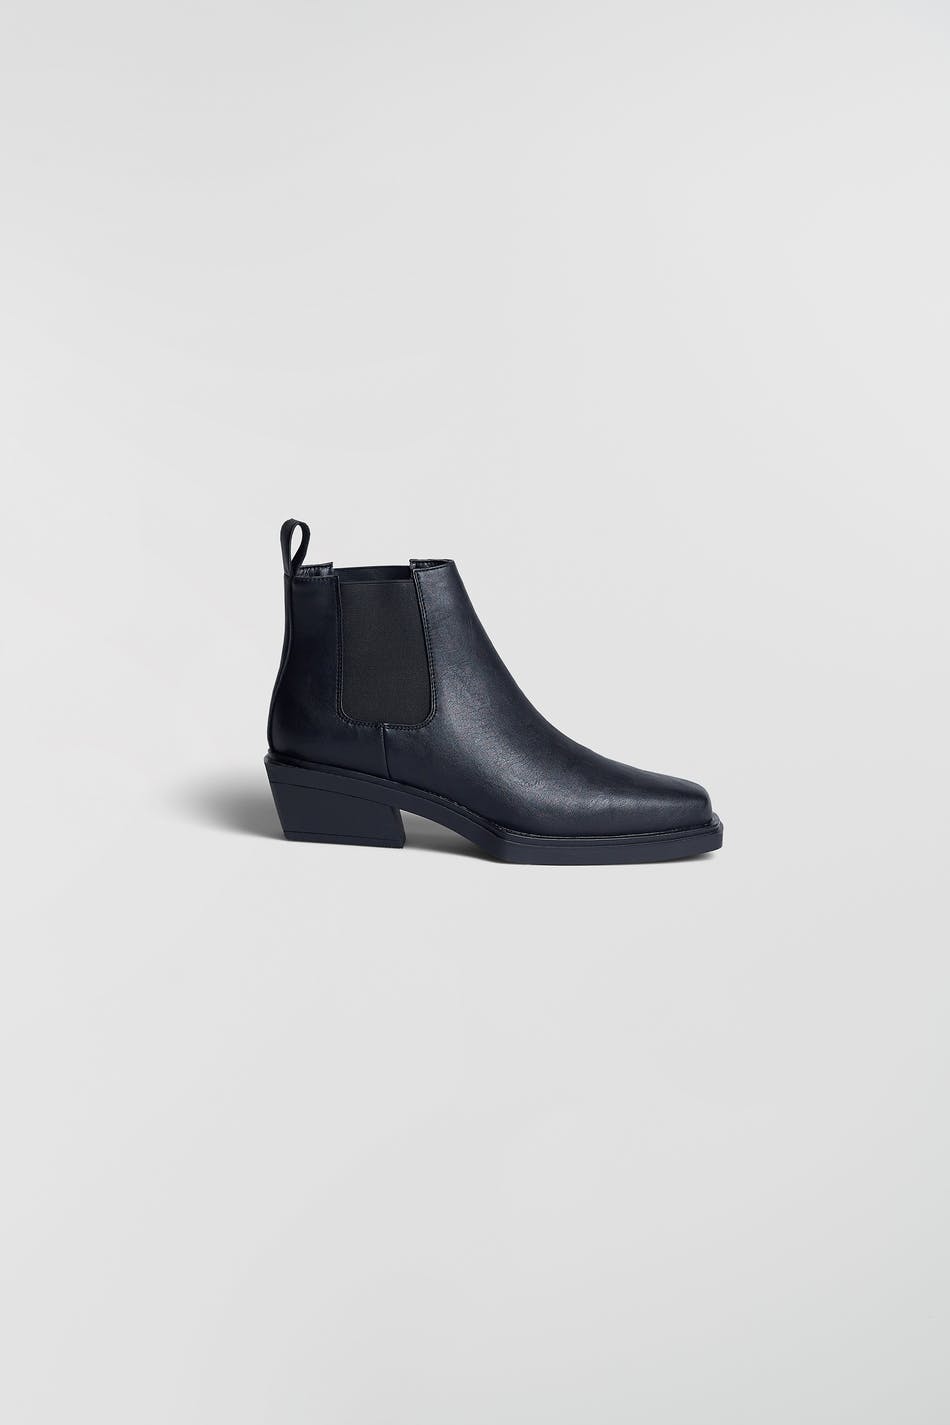 Aubrey ankle boots